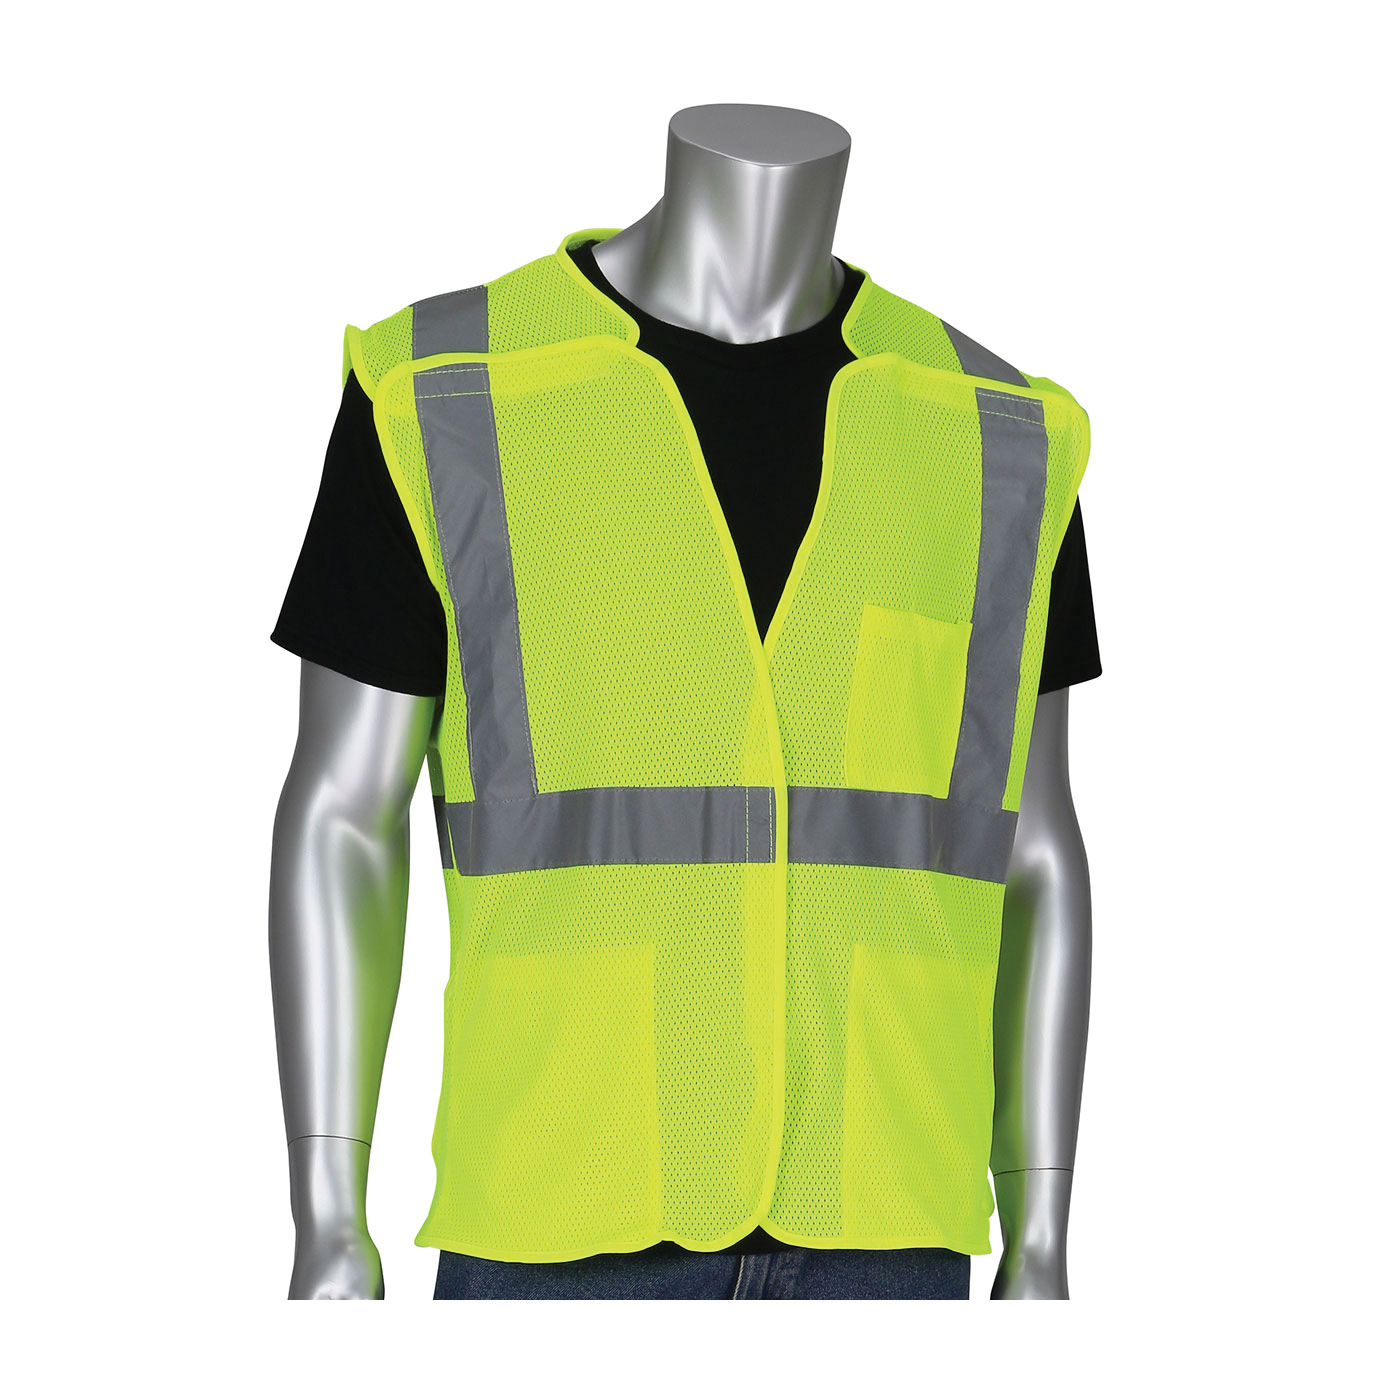 PIP® 302-5PMVLY-S Safety Vest, S, Hi-Viz Lime Yellow, Polyester, Hook and Loop Closure, 3 Pockets, ANSI Class: Class 2, Specifications Met: ANSI 107 Type R